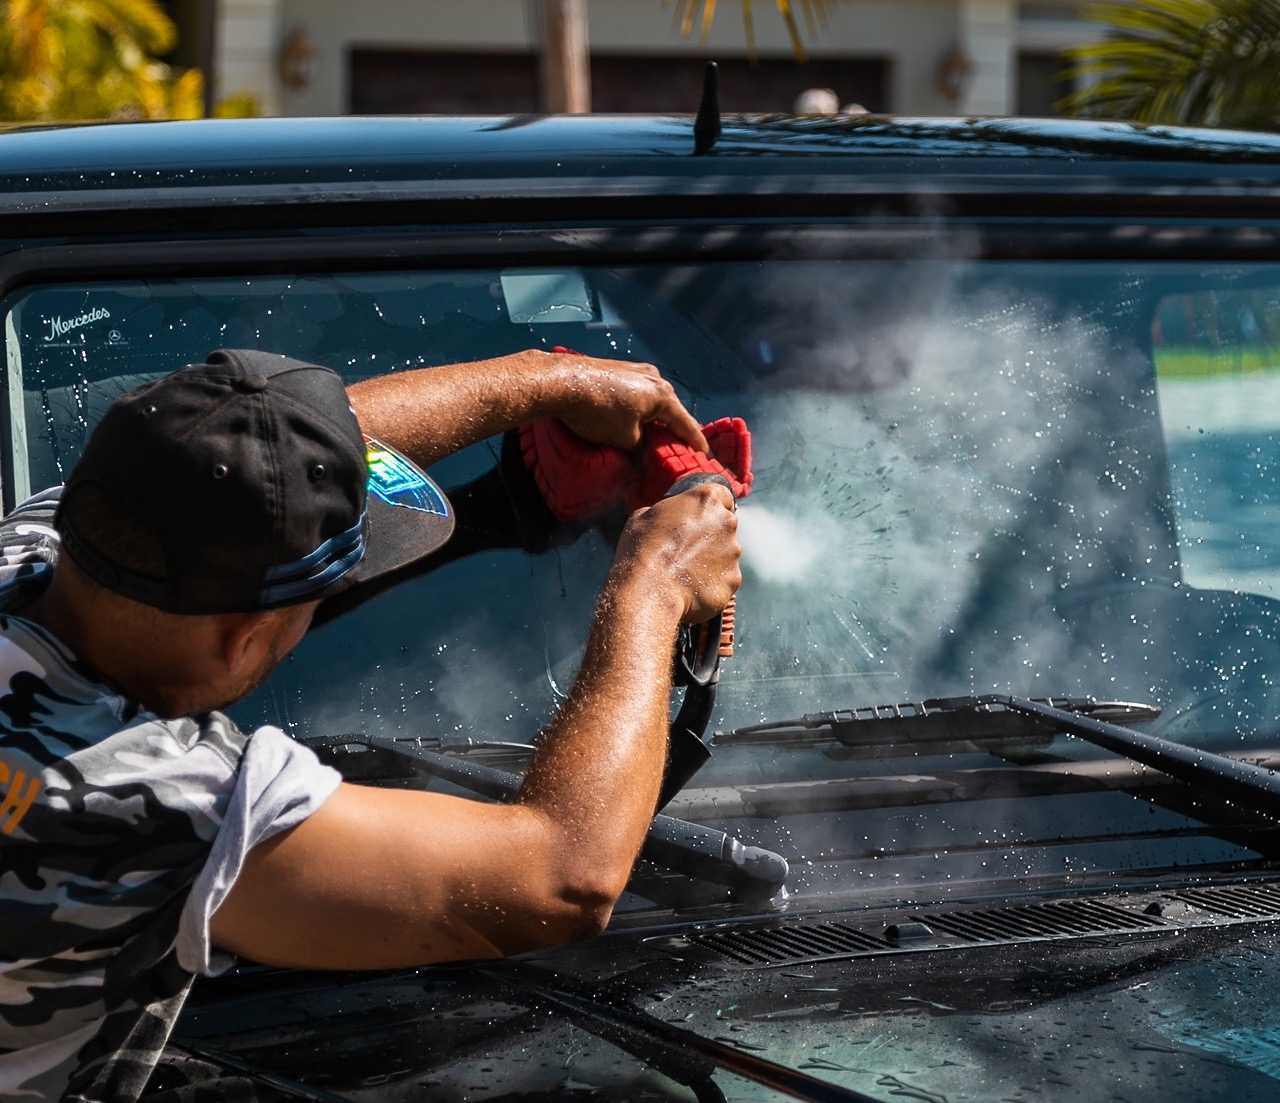 Cleaning car windows with steam